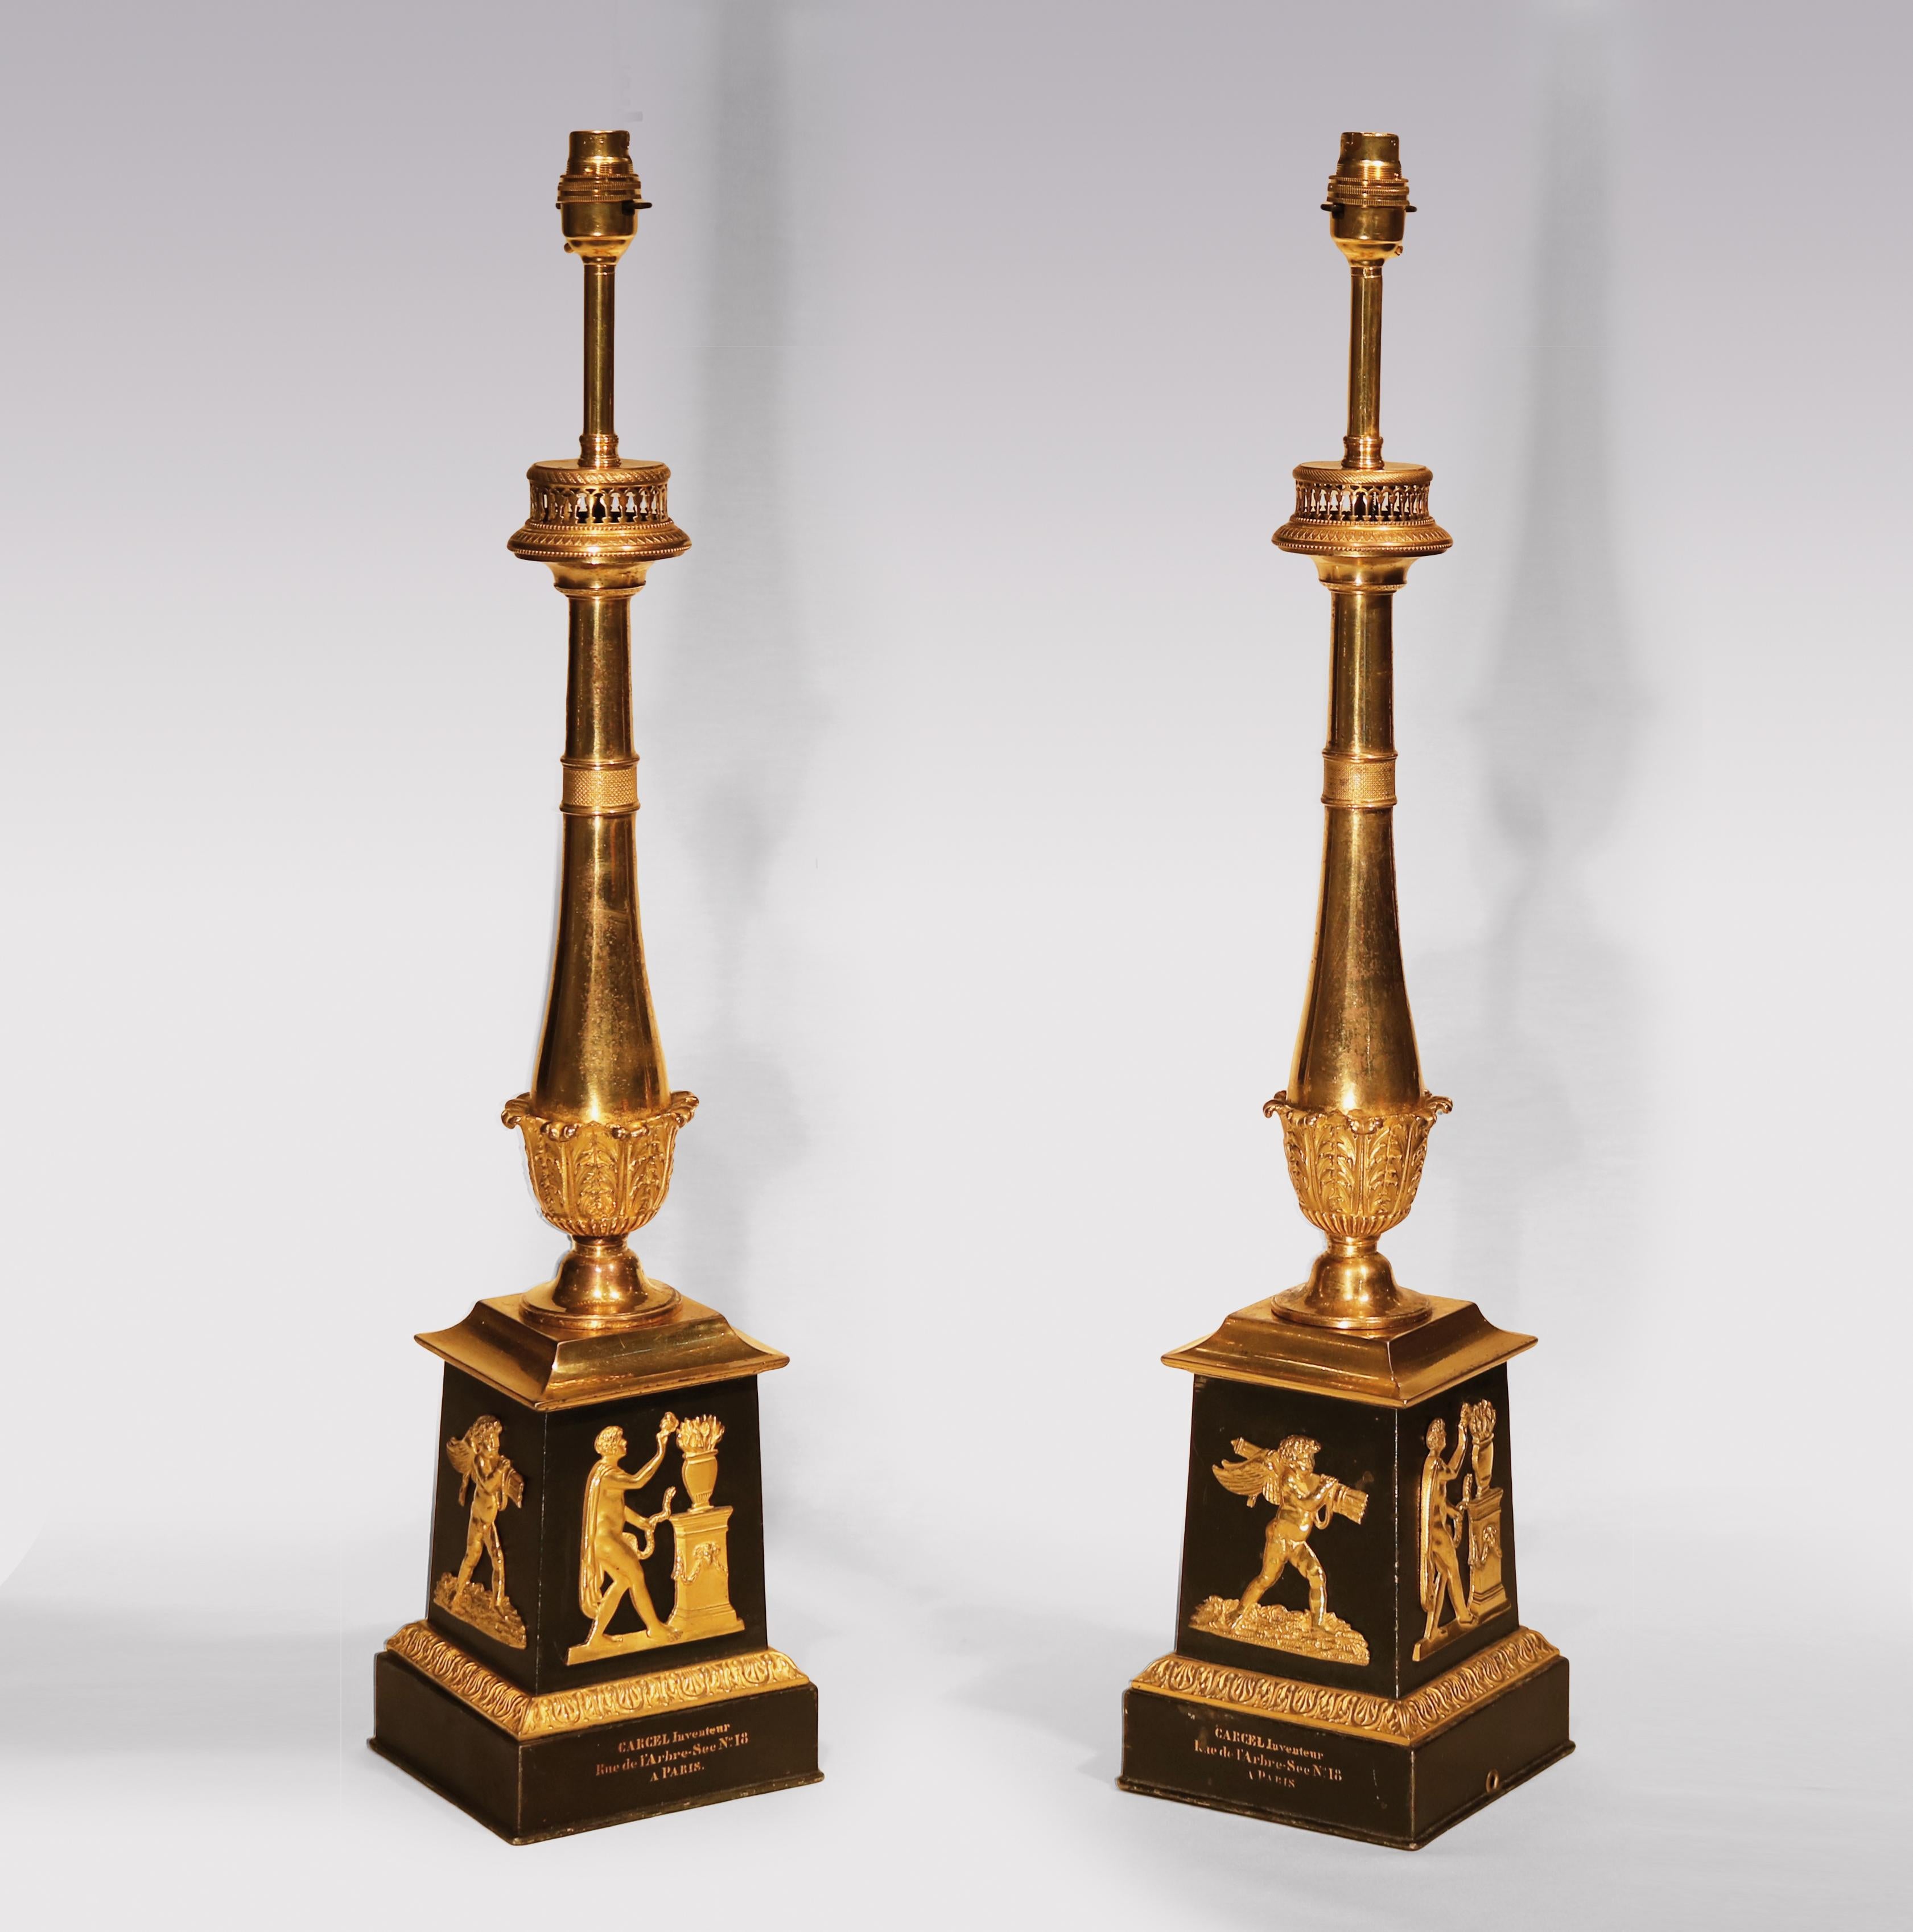 A pair of early 19th century carcel oil lamps, having engine turned stems with acanthus leaf decoration raised on square bases with applied classical mounts ending on plinth bases stamped:
